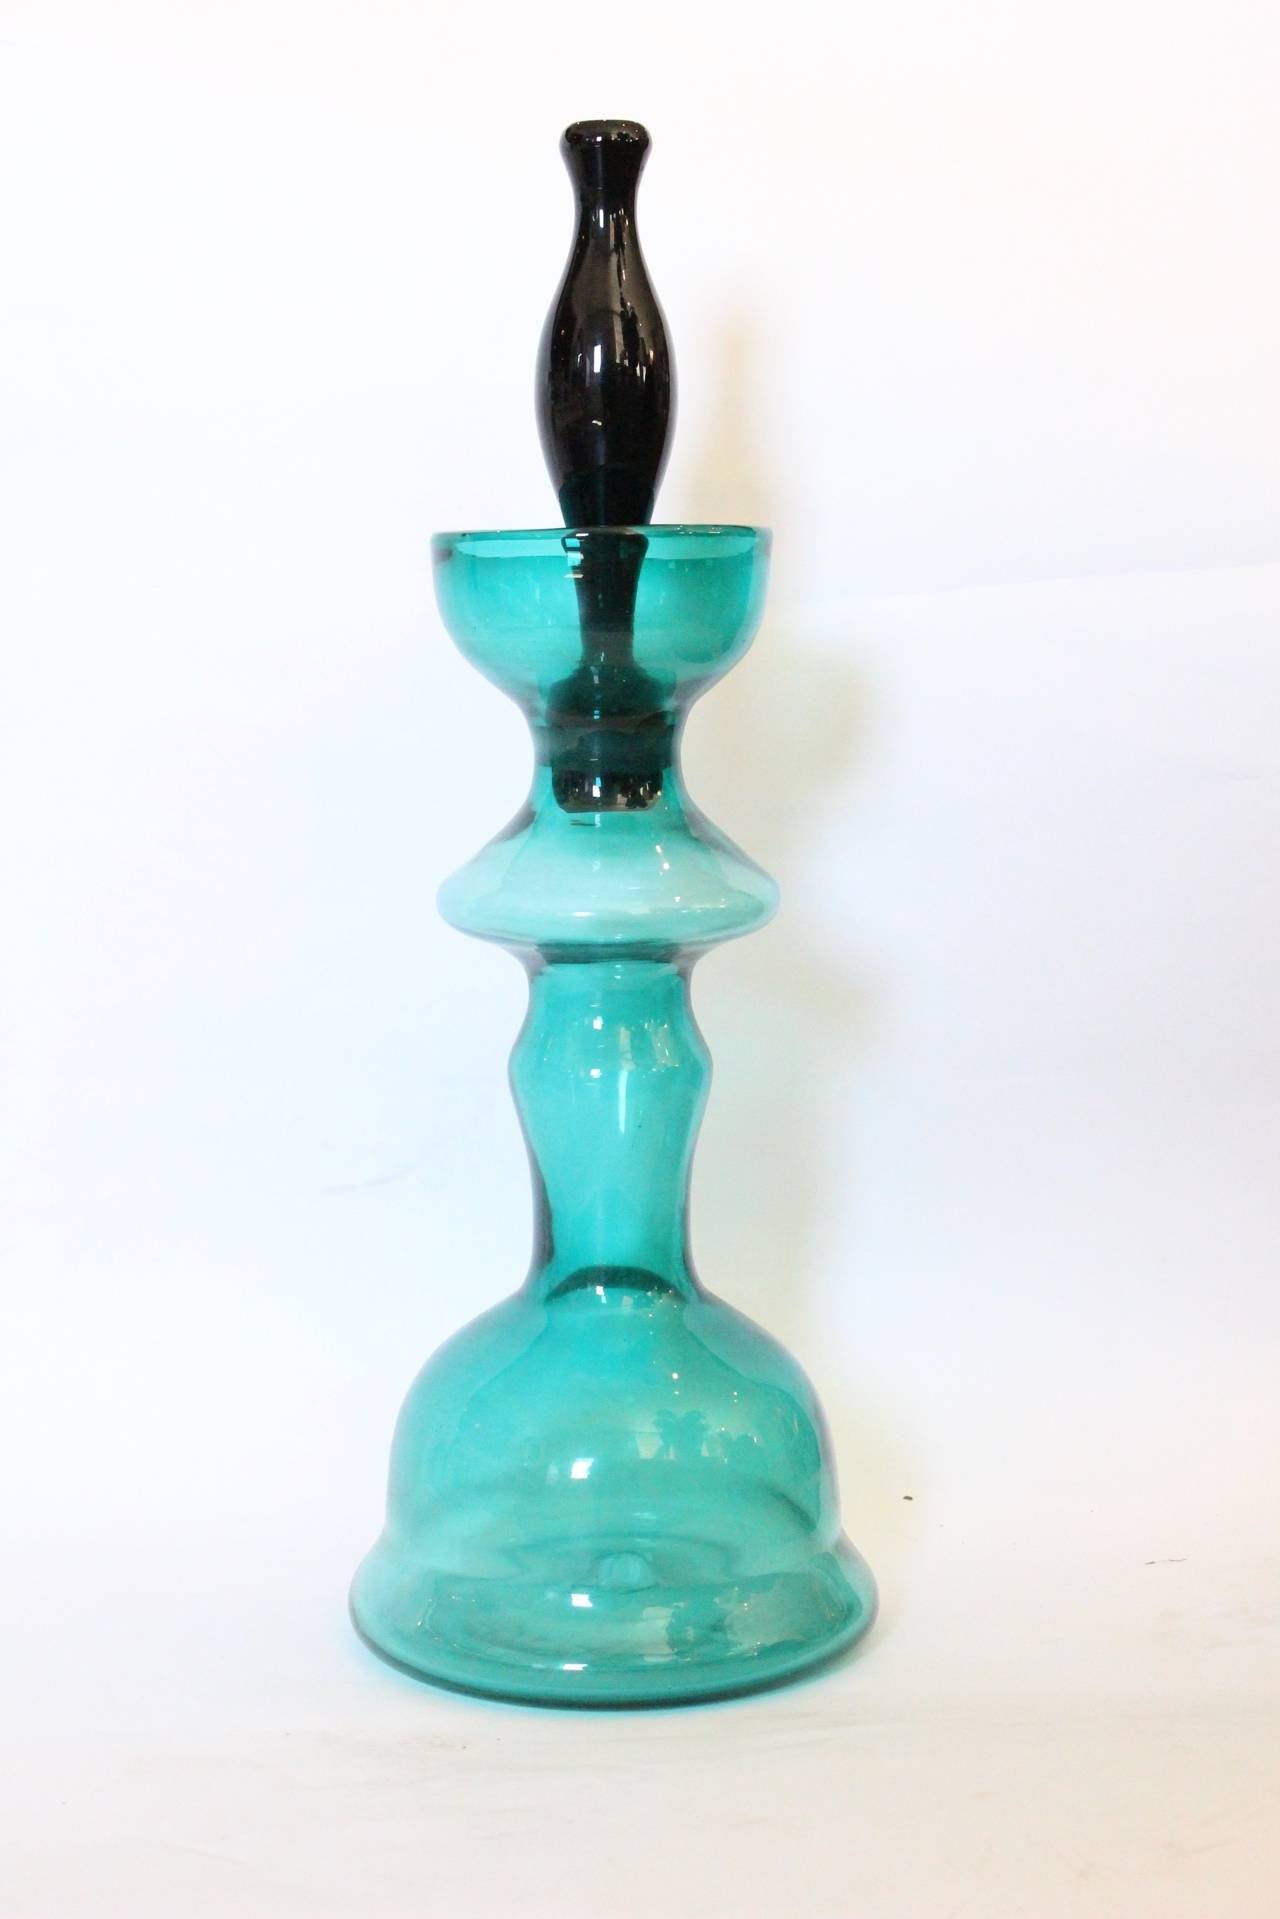 Teal glass decanter by Wayne Husted for Blenko. Signed, circa 1960s.

Dimensions: 7